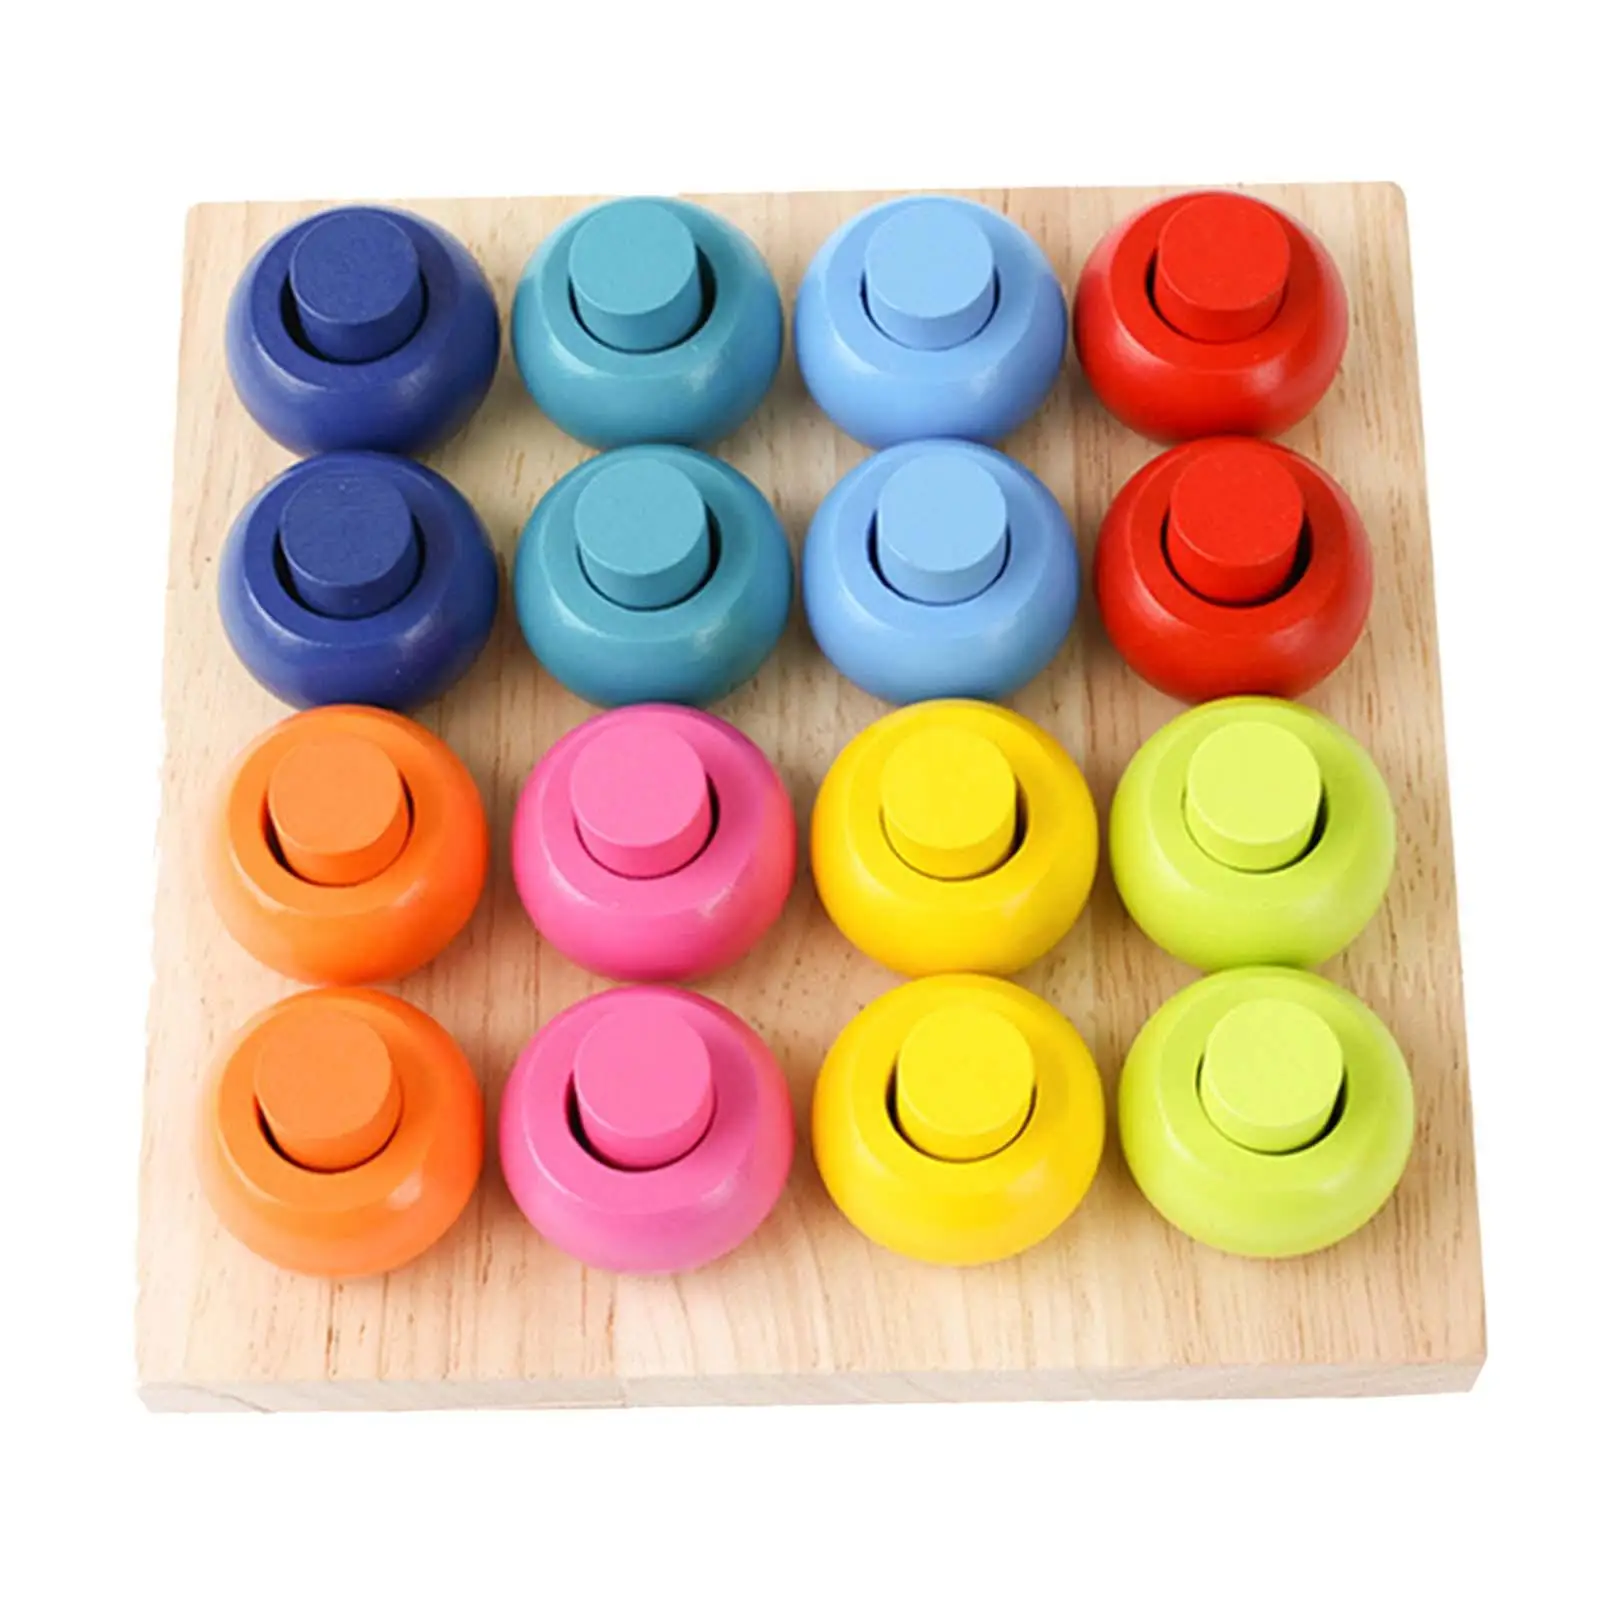 Wooden Stacking Peg Board Educational Wood Blocks Sorting Puzzle Sorter Stacker Colour Sorting Puzzle for Kids Early Education